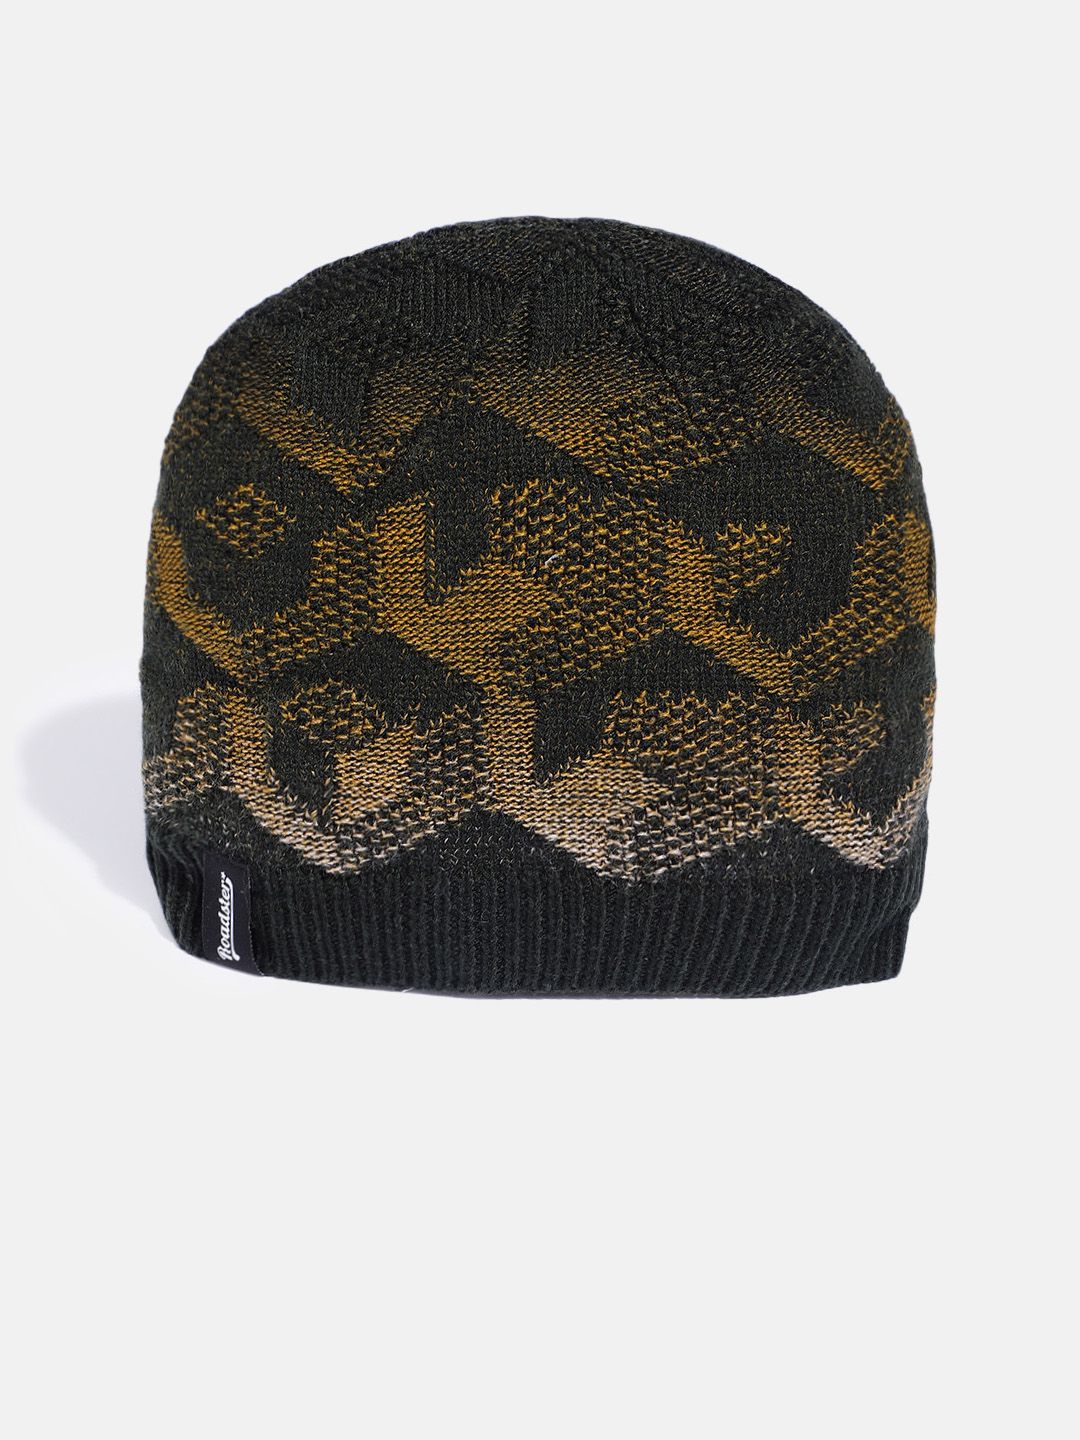 The Roadster Lifestyle Co Unisex Green & Yellow Self Design Beanie Price in India